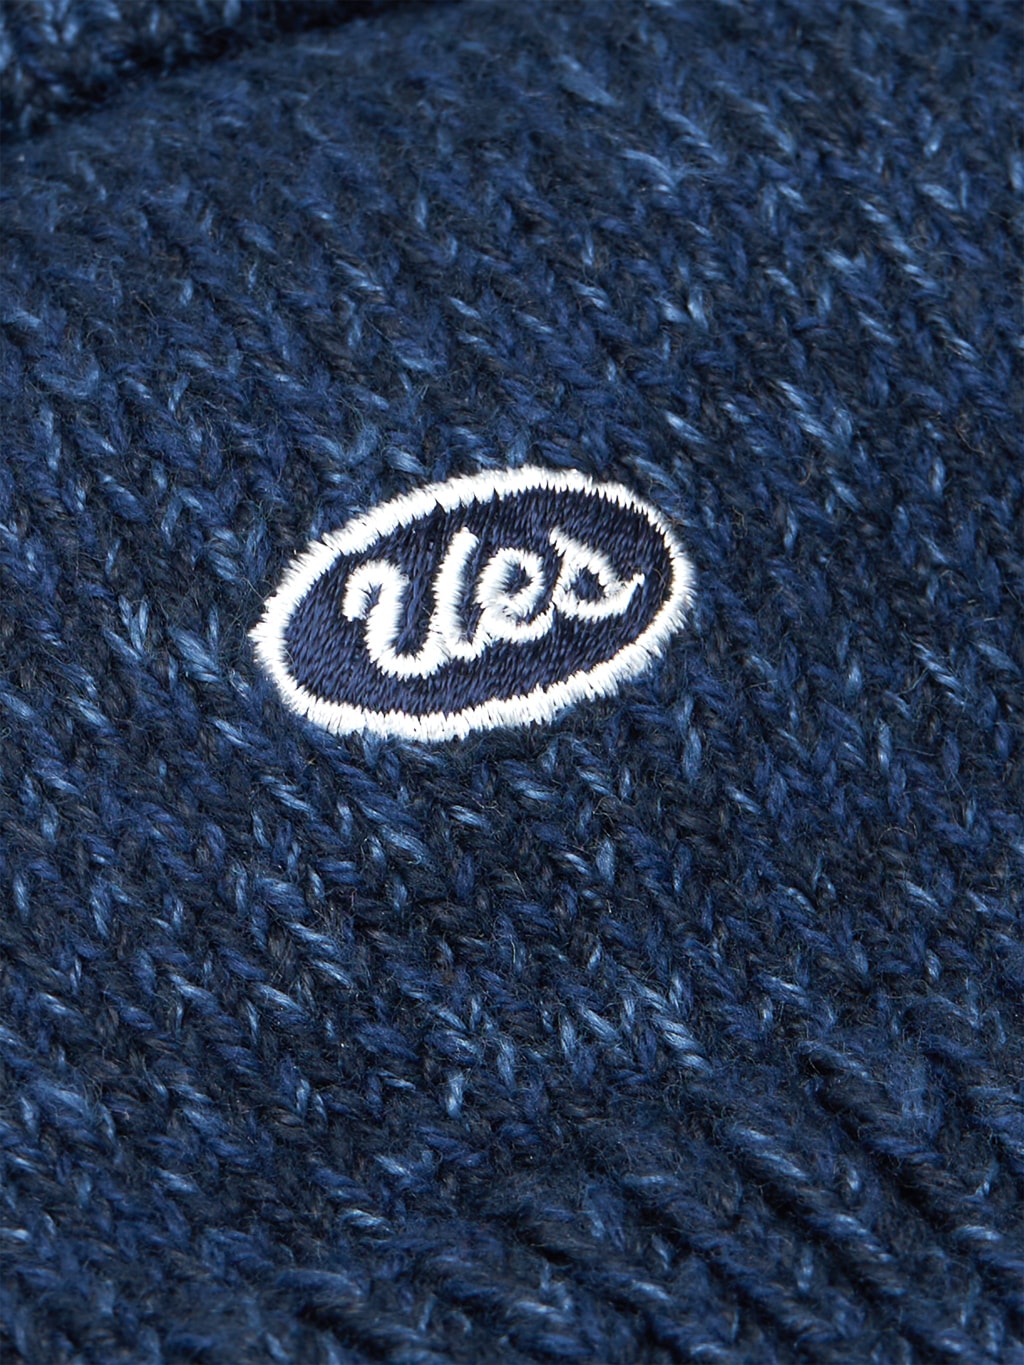 UES Sneakers Socks Navy and Yellow embroided brand logo